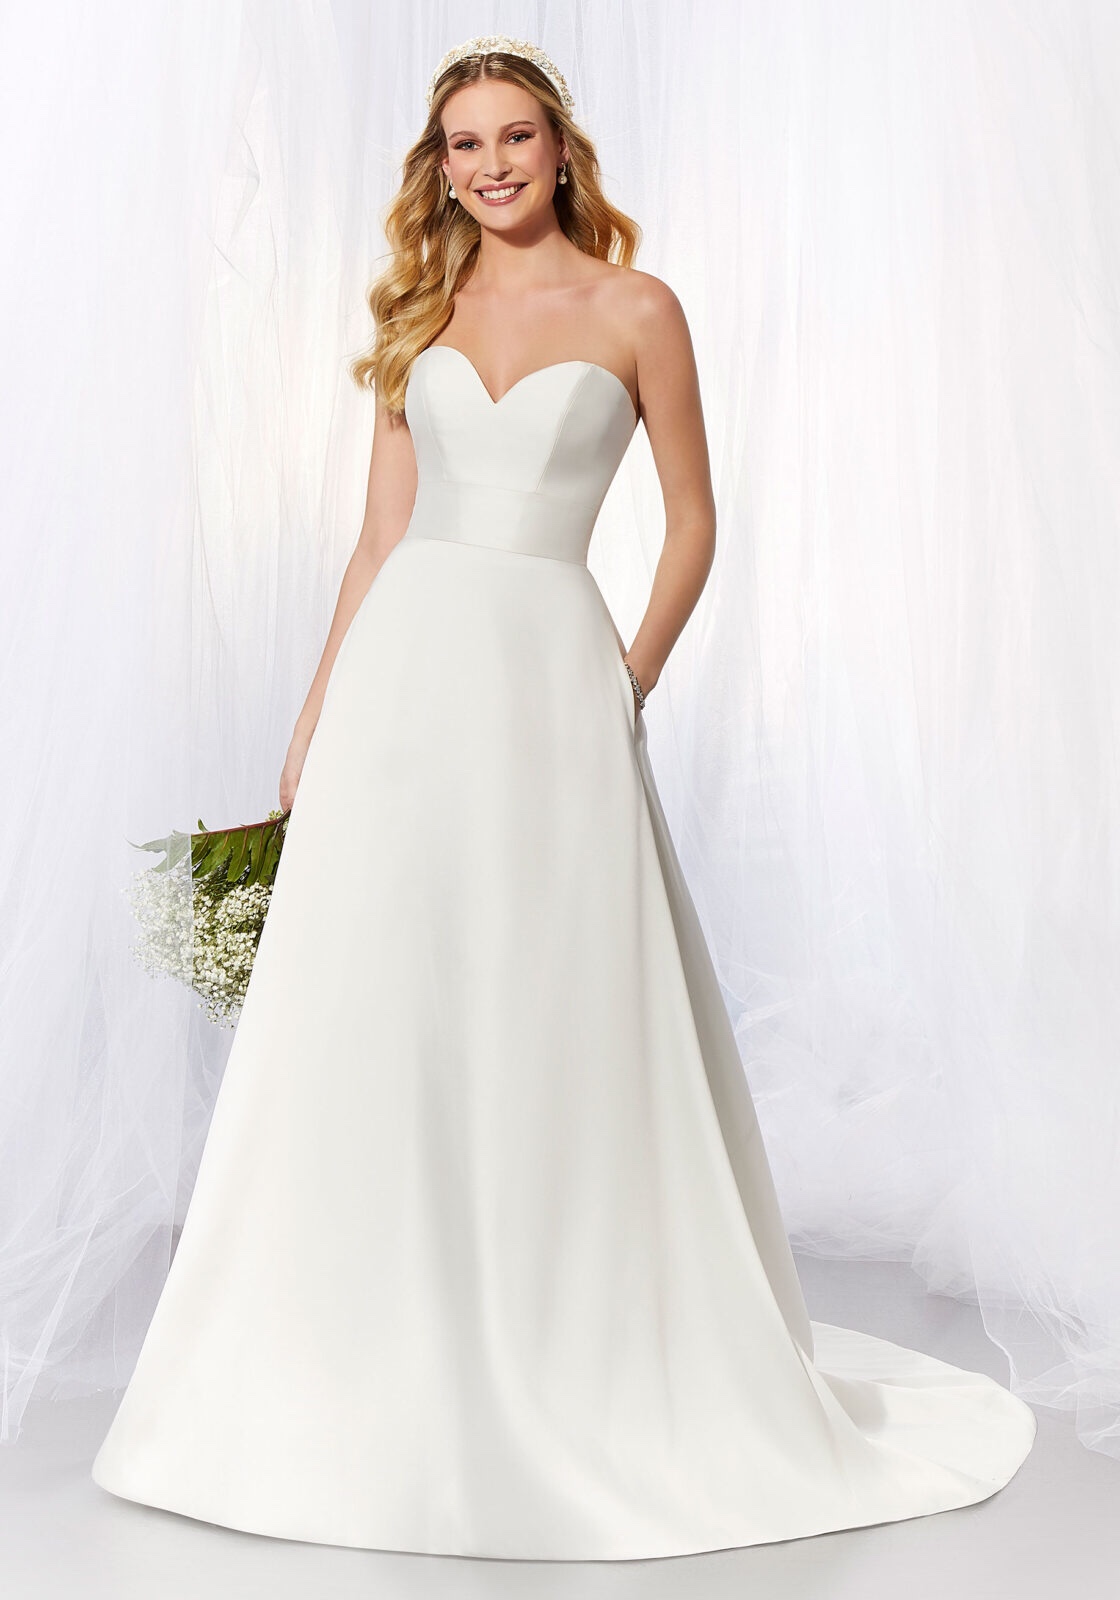 Best Prices Of Mori Lee Wedding Dresses of the decade Don t miss out 